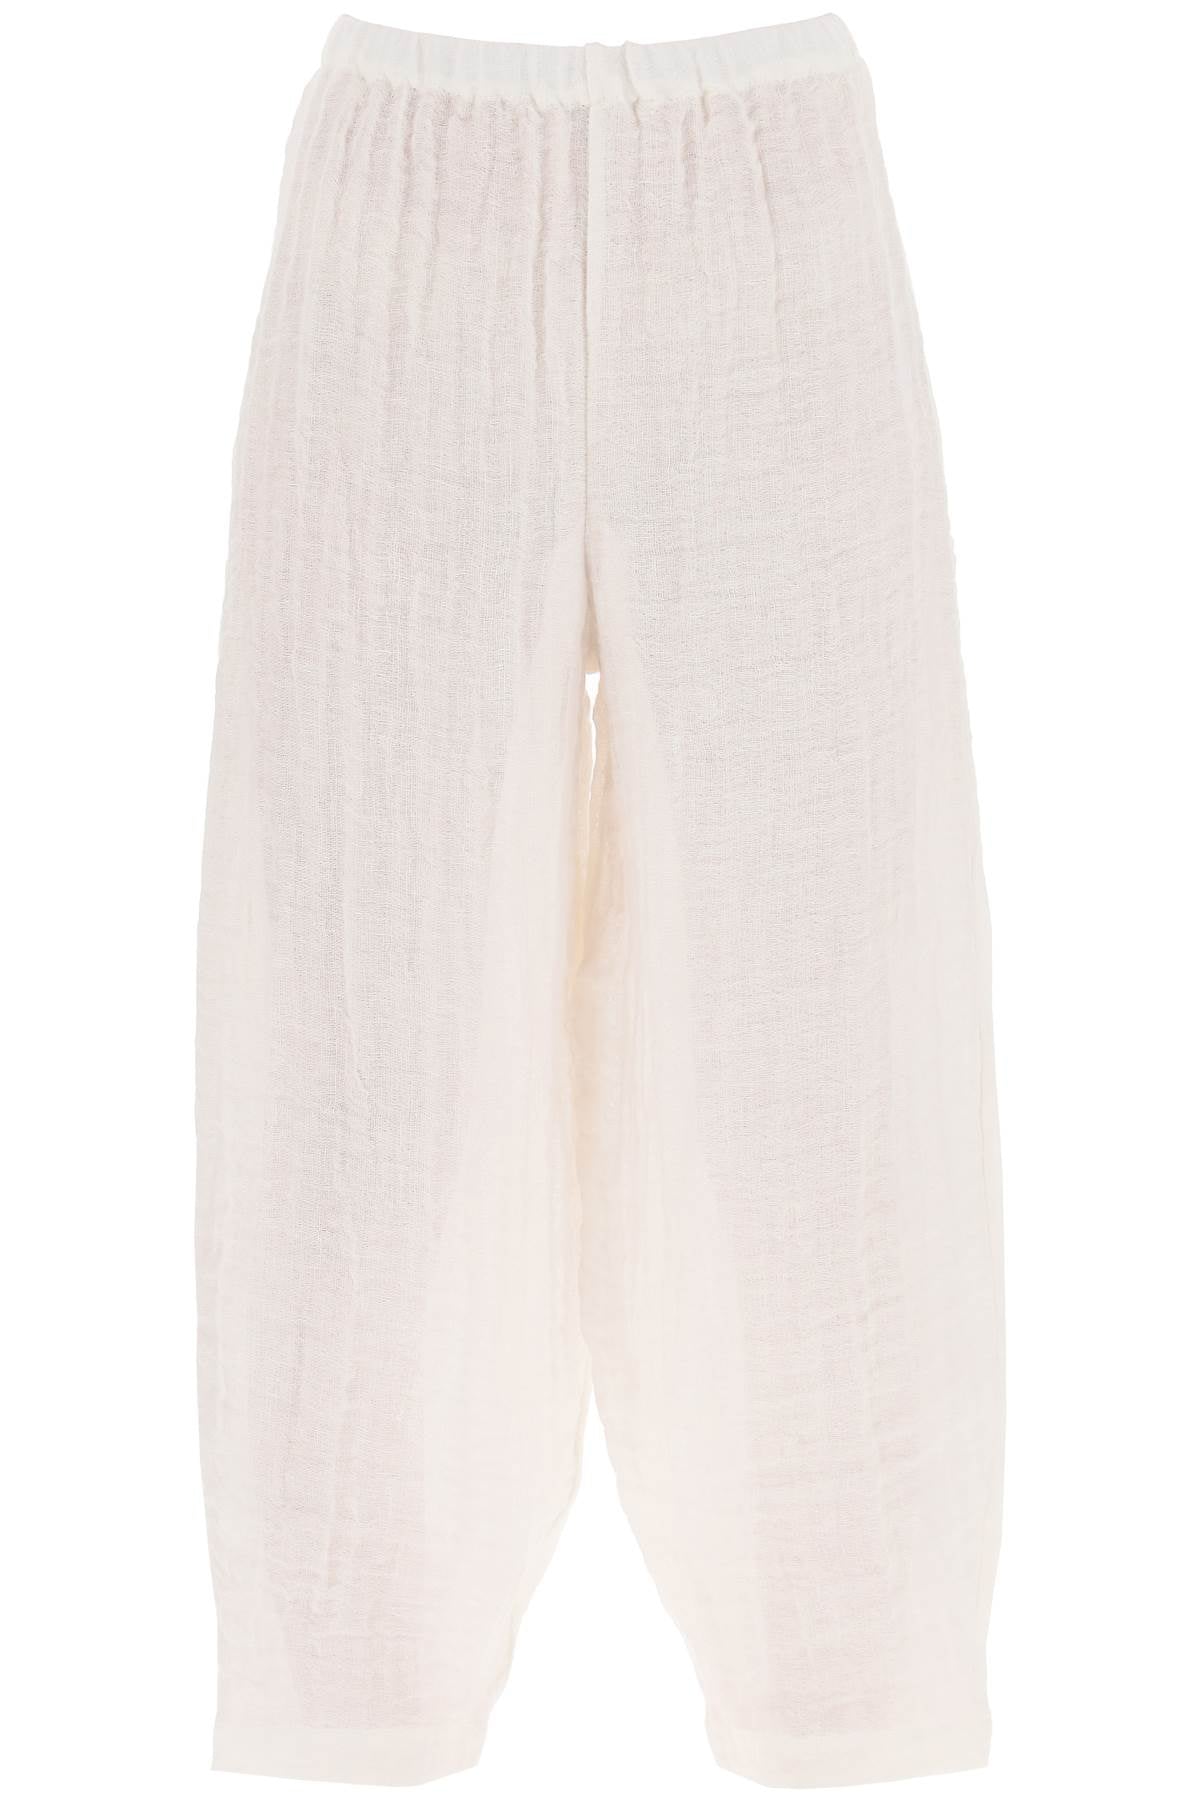 By Malene Birger organic linen mikele pants for - White